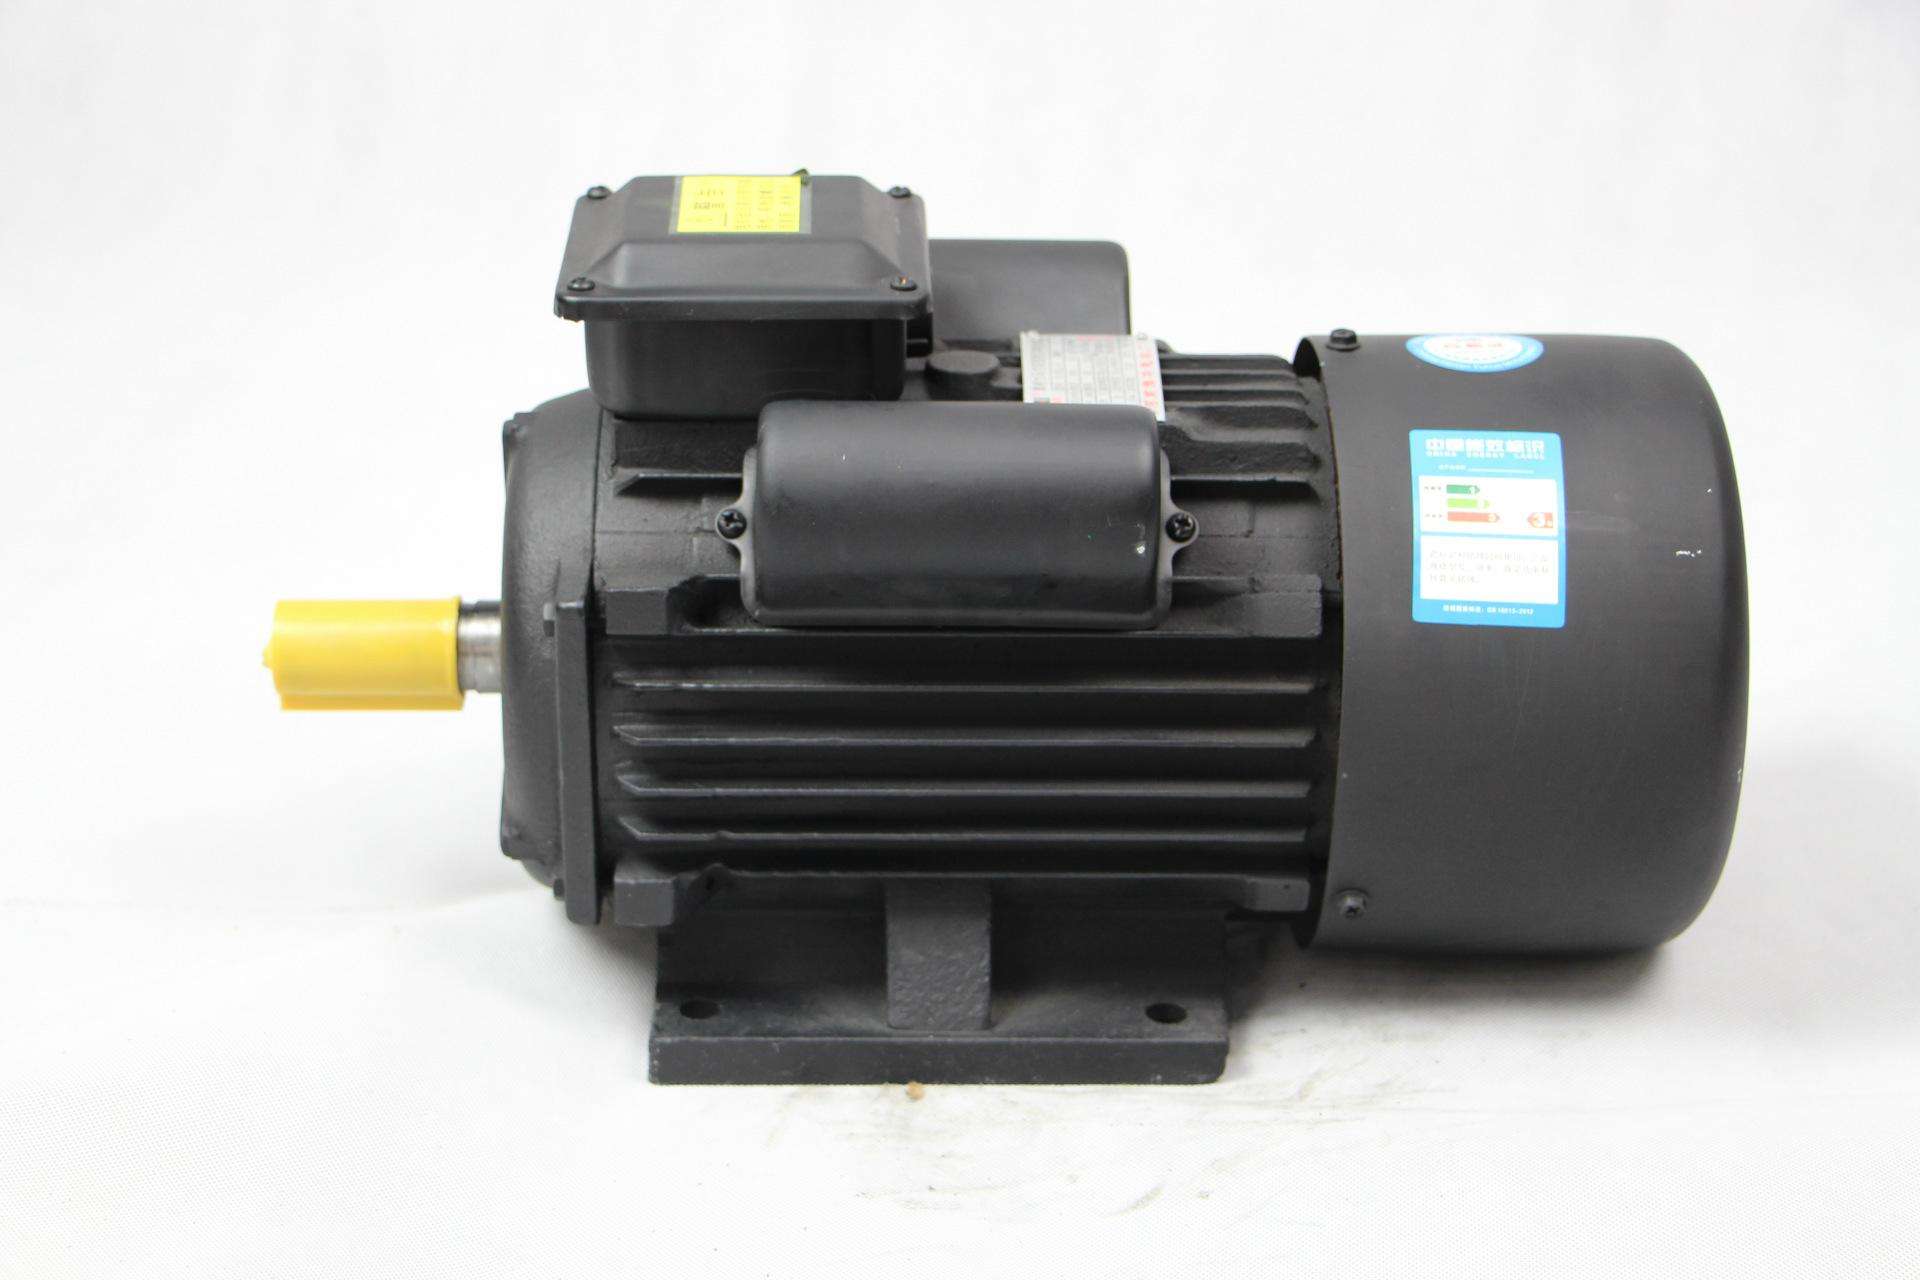 DC Motor manufacturers in China